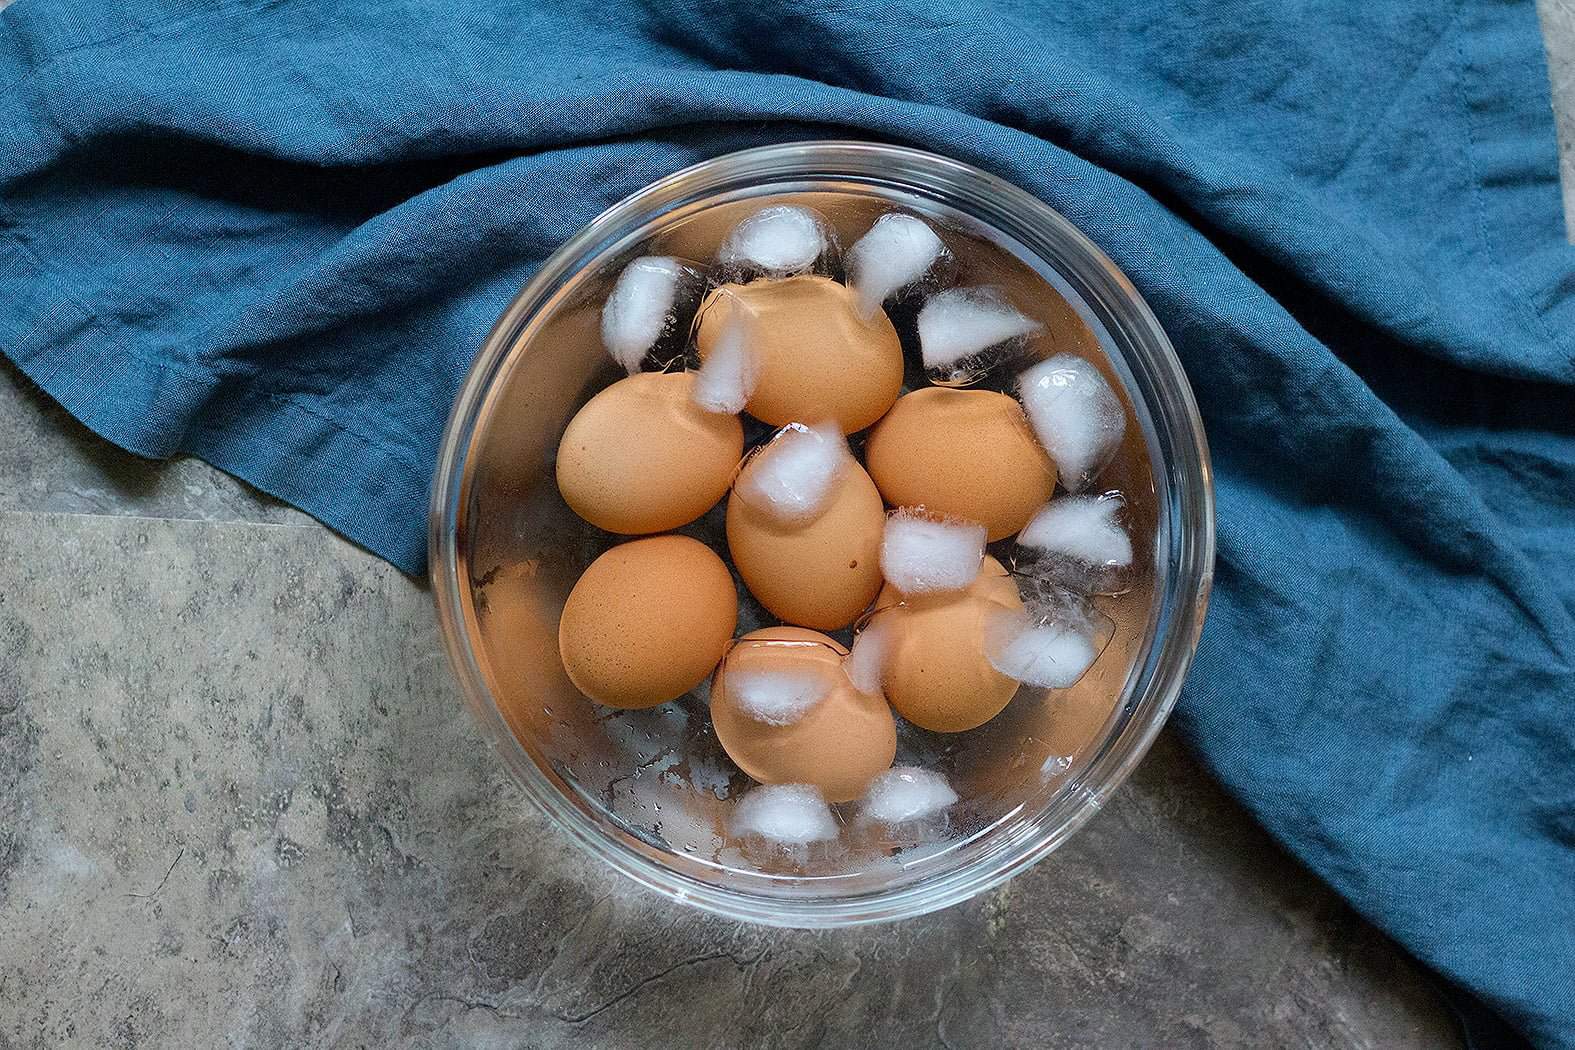 Once the lid is unlocked, take the eggs out of the instant pot very carefully and put them in an ice water bath for 5 minutes. Peel and enjoy right away or store in the fridge. 